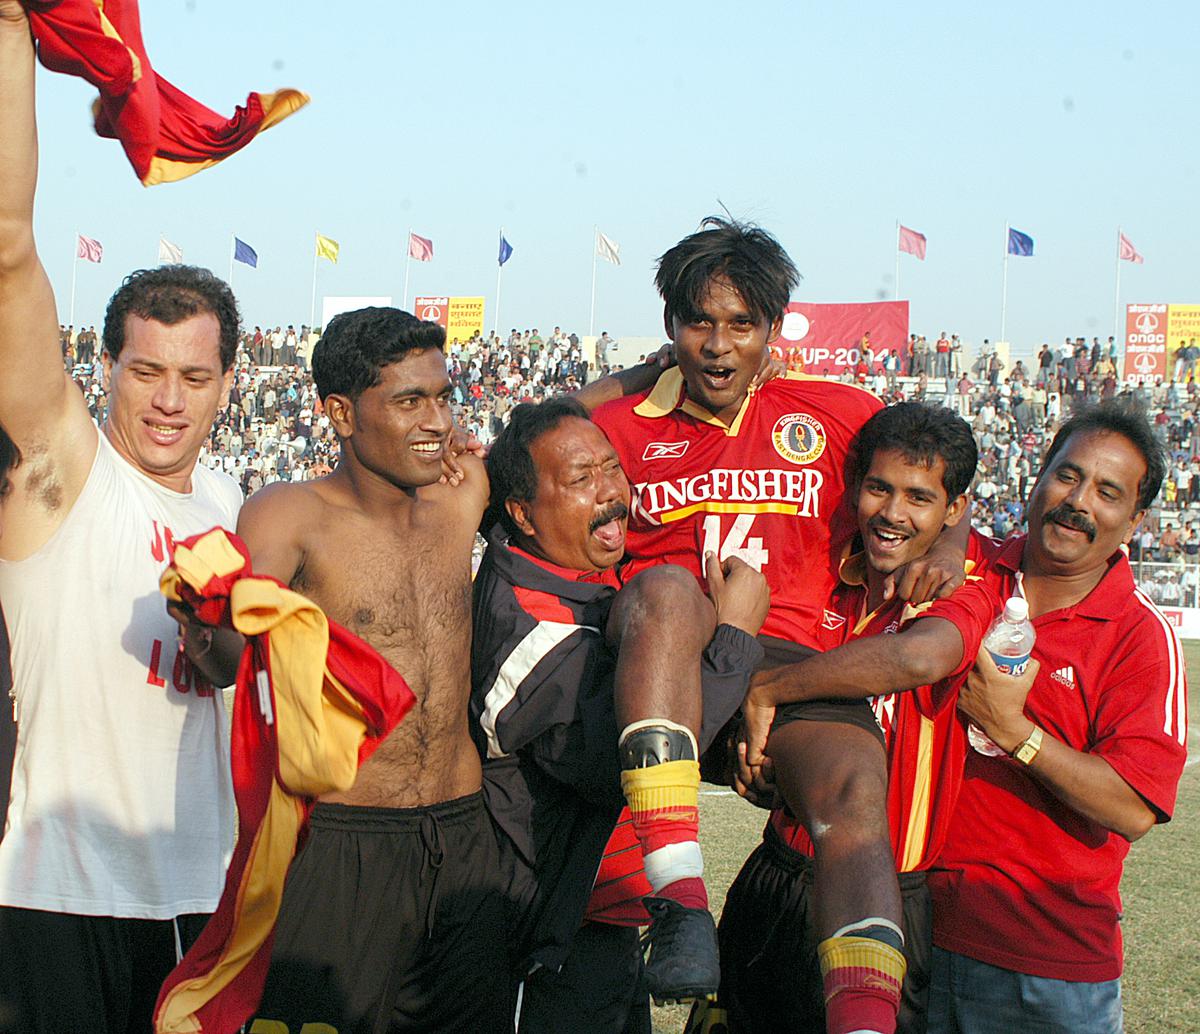 Chandan Das, the captain of the East Bengal team being lifted up by his team-mates,  to congratulate him after East Bengal won the the final match of the Durand Cup football title at the Ambedkar stadium in New Delhi on November 10, 2004. 